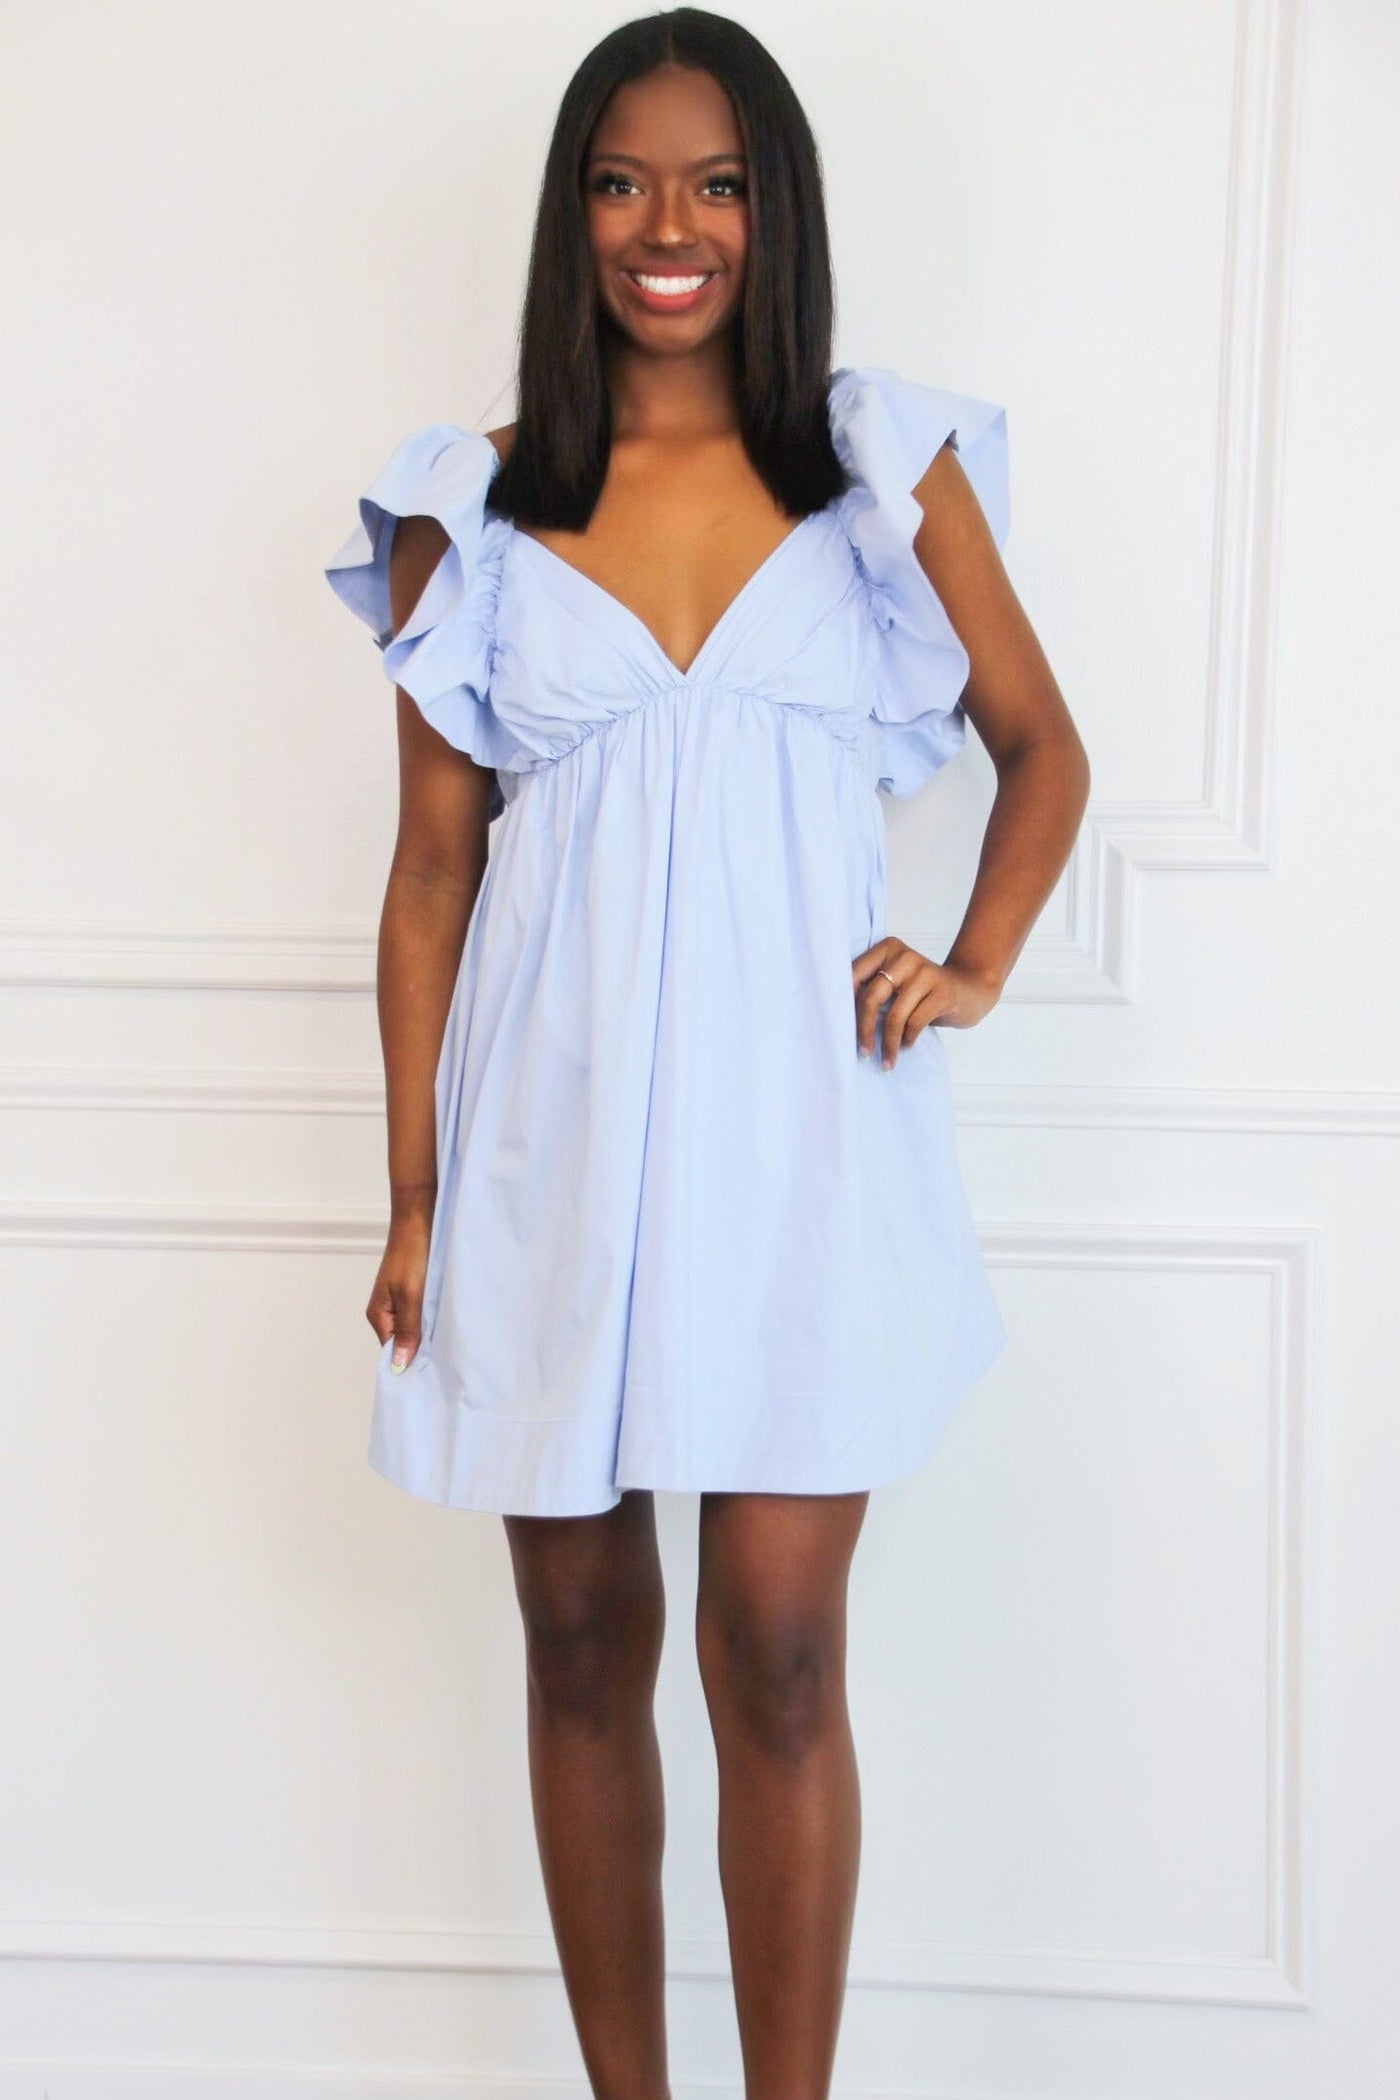 Wine Country Babydoll Dress: Light Blue - Bella and Bloom Boutique